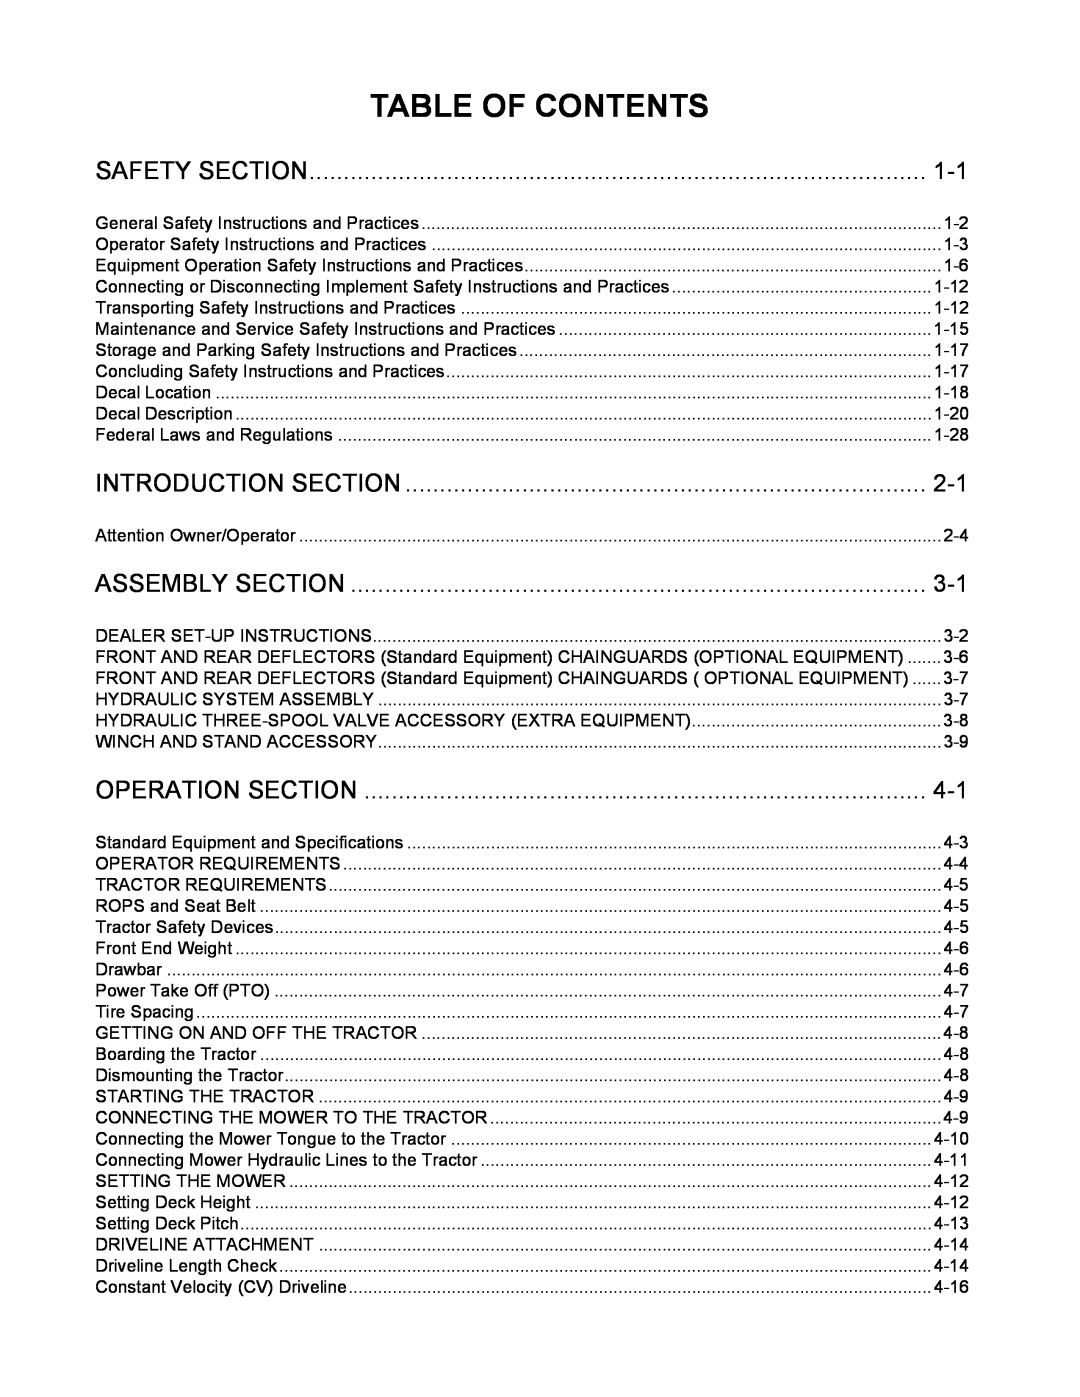 Alamo SX15 manual Table Of Contents, Safety Section, Introduction Section, Assembly Section, Operation Section 